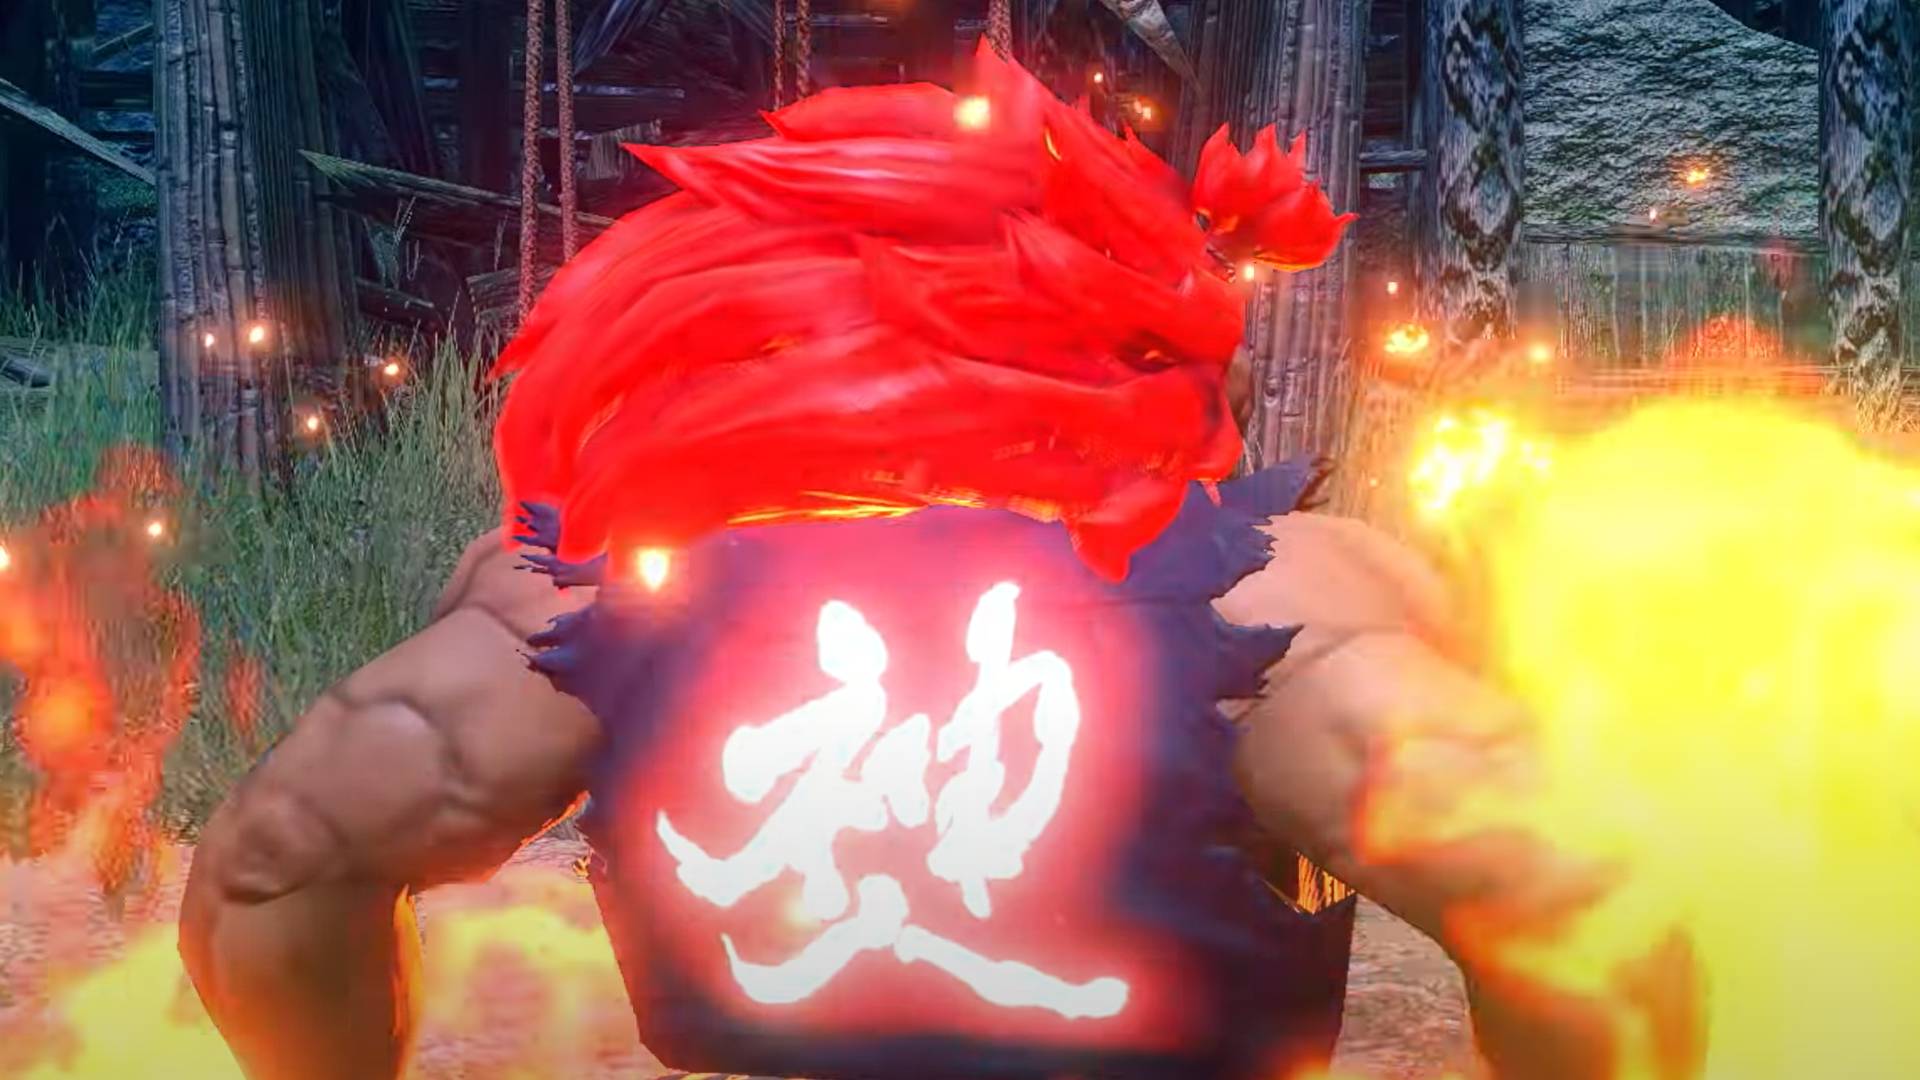 Punch Monsters In The Face With Street Fighter's Akuma In Monster Hunter  Rise - Game Informer